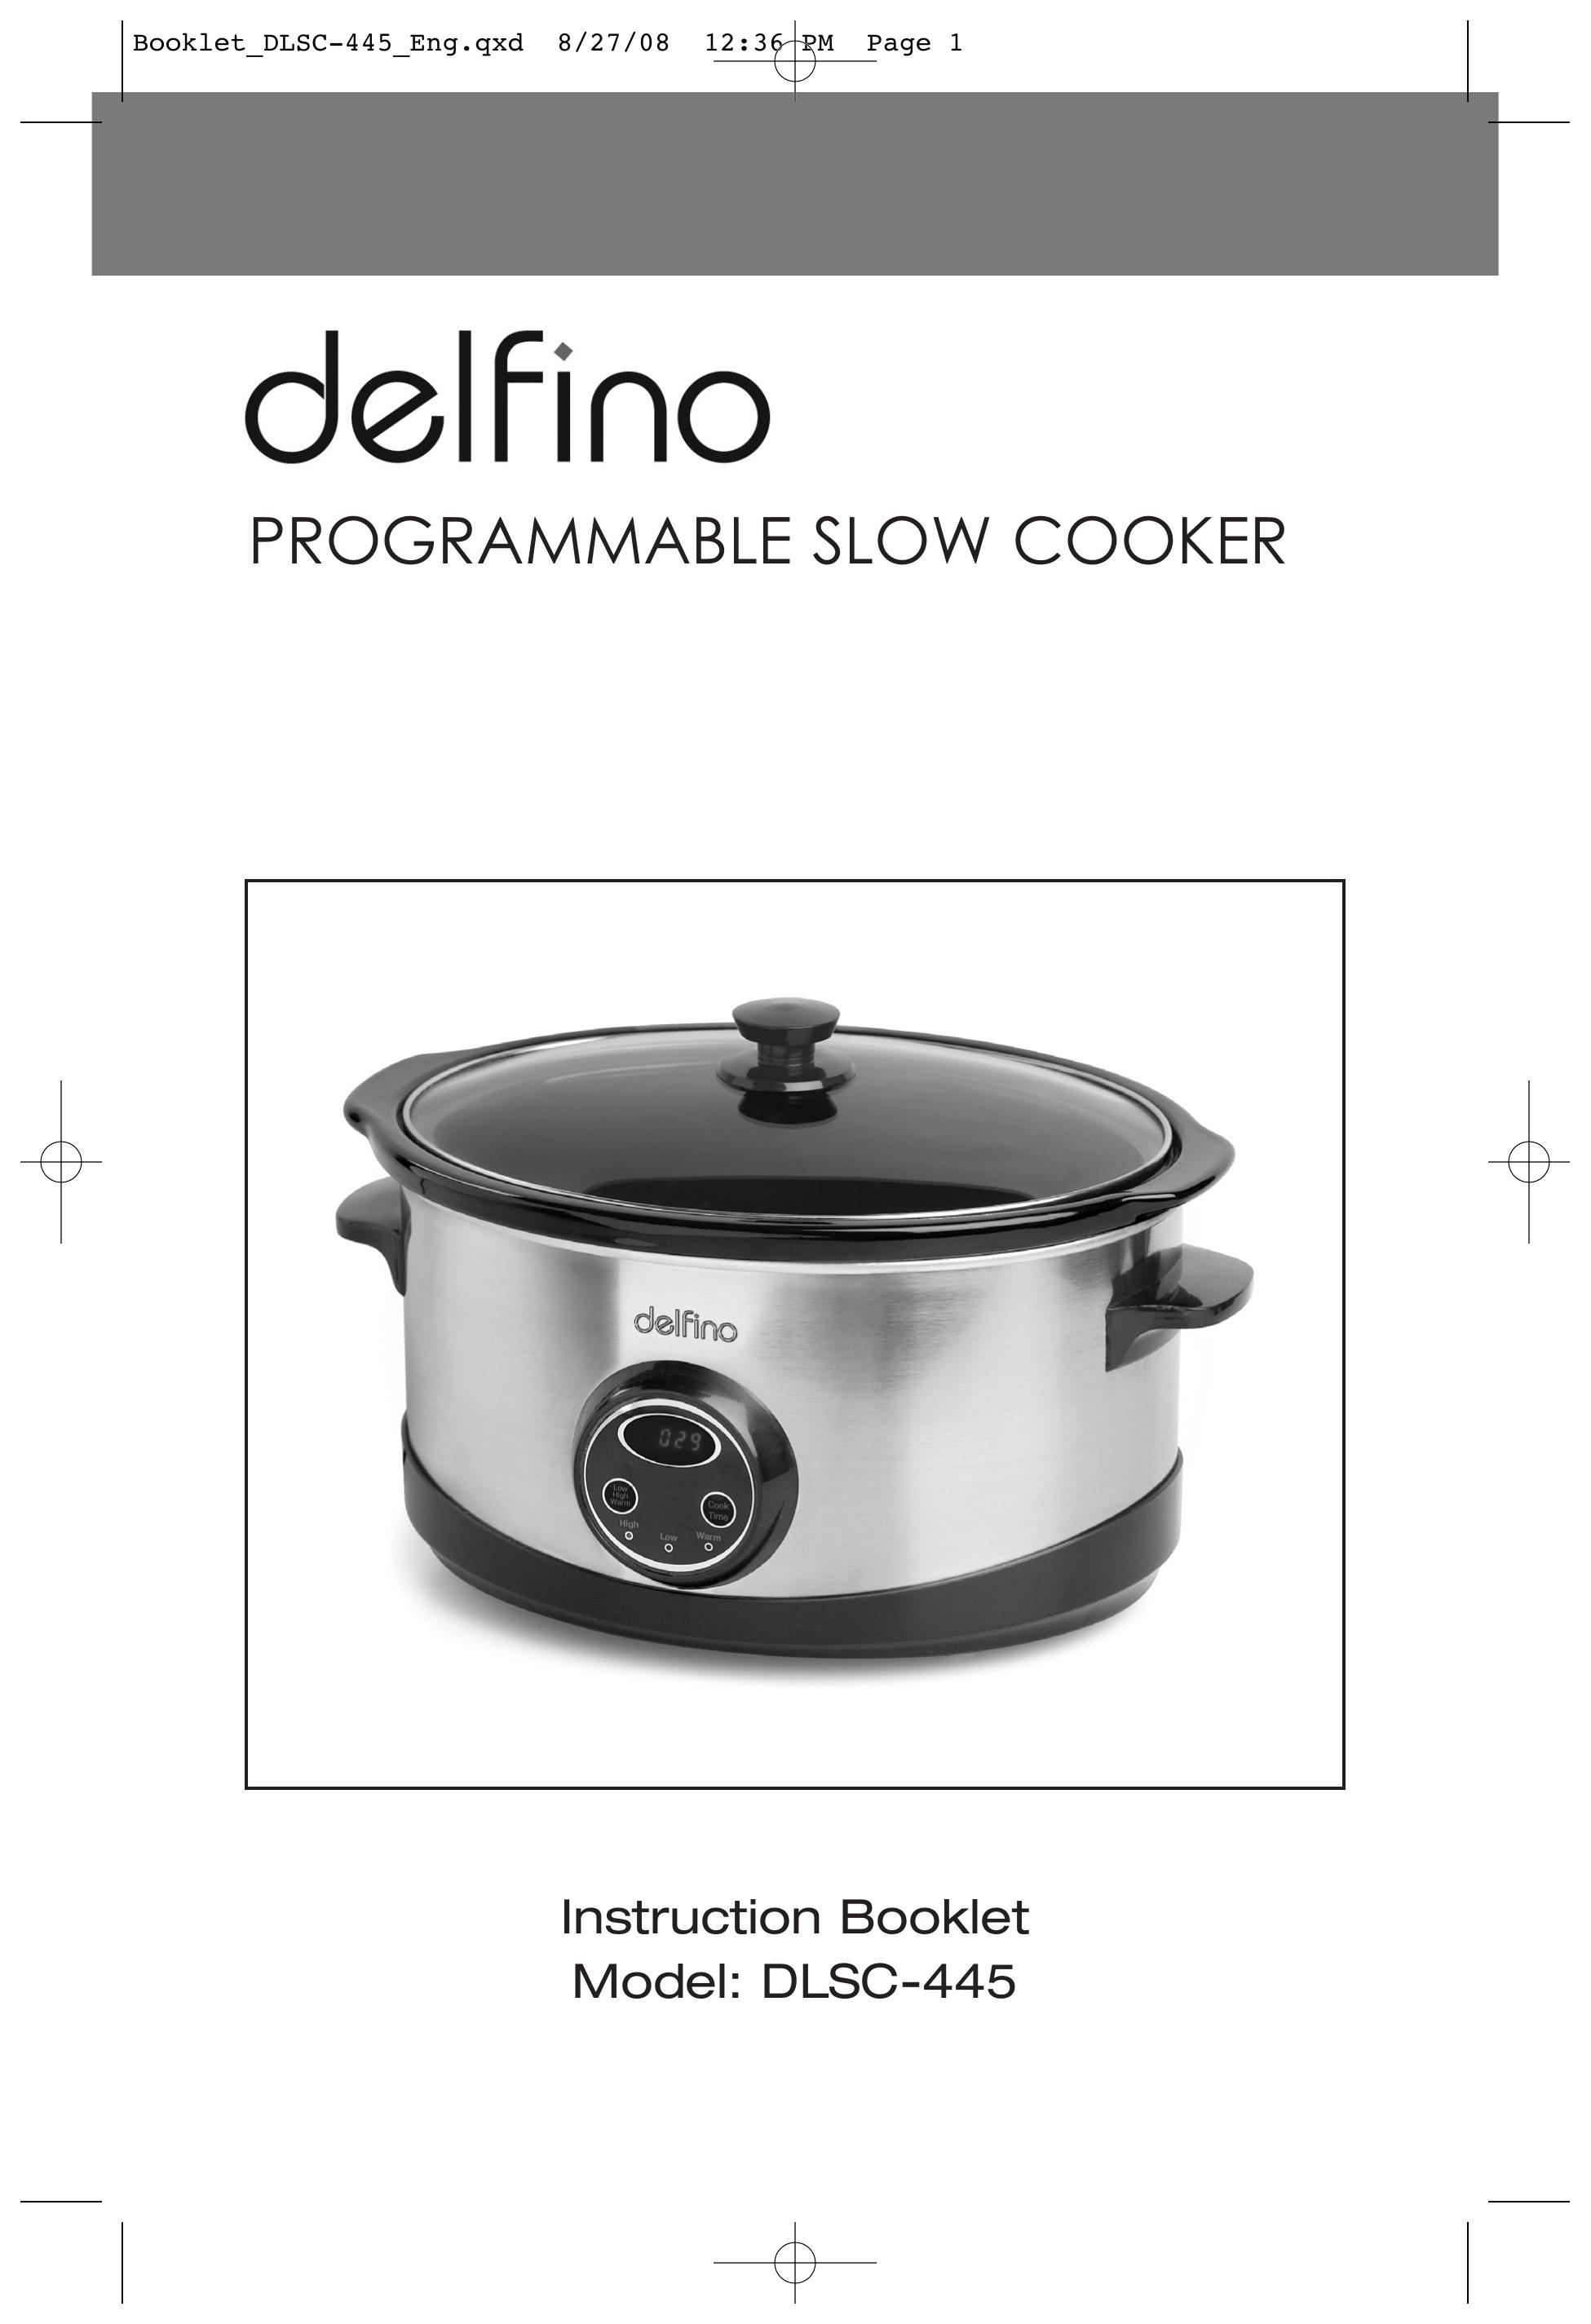 Toastess DLSC-445 Slow Cooker User Manual